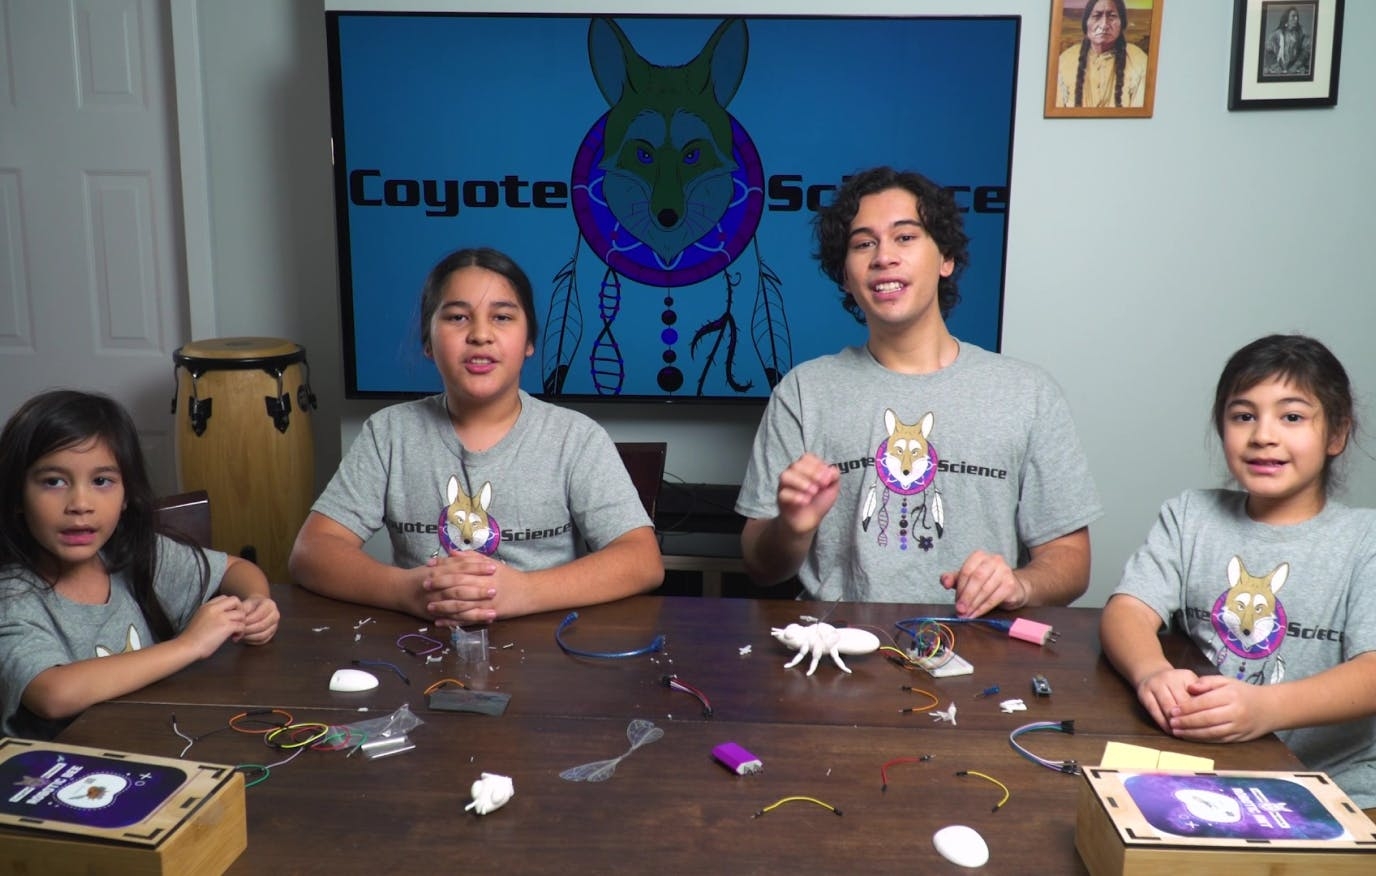 Coyote Science Questers